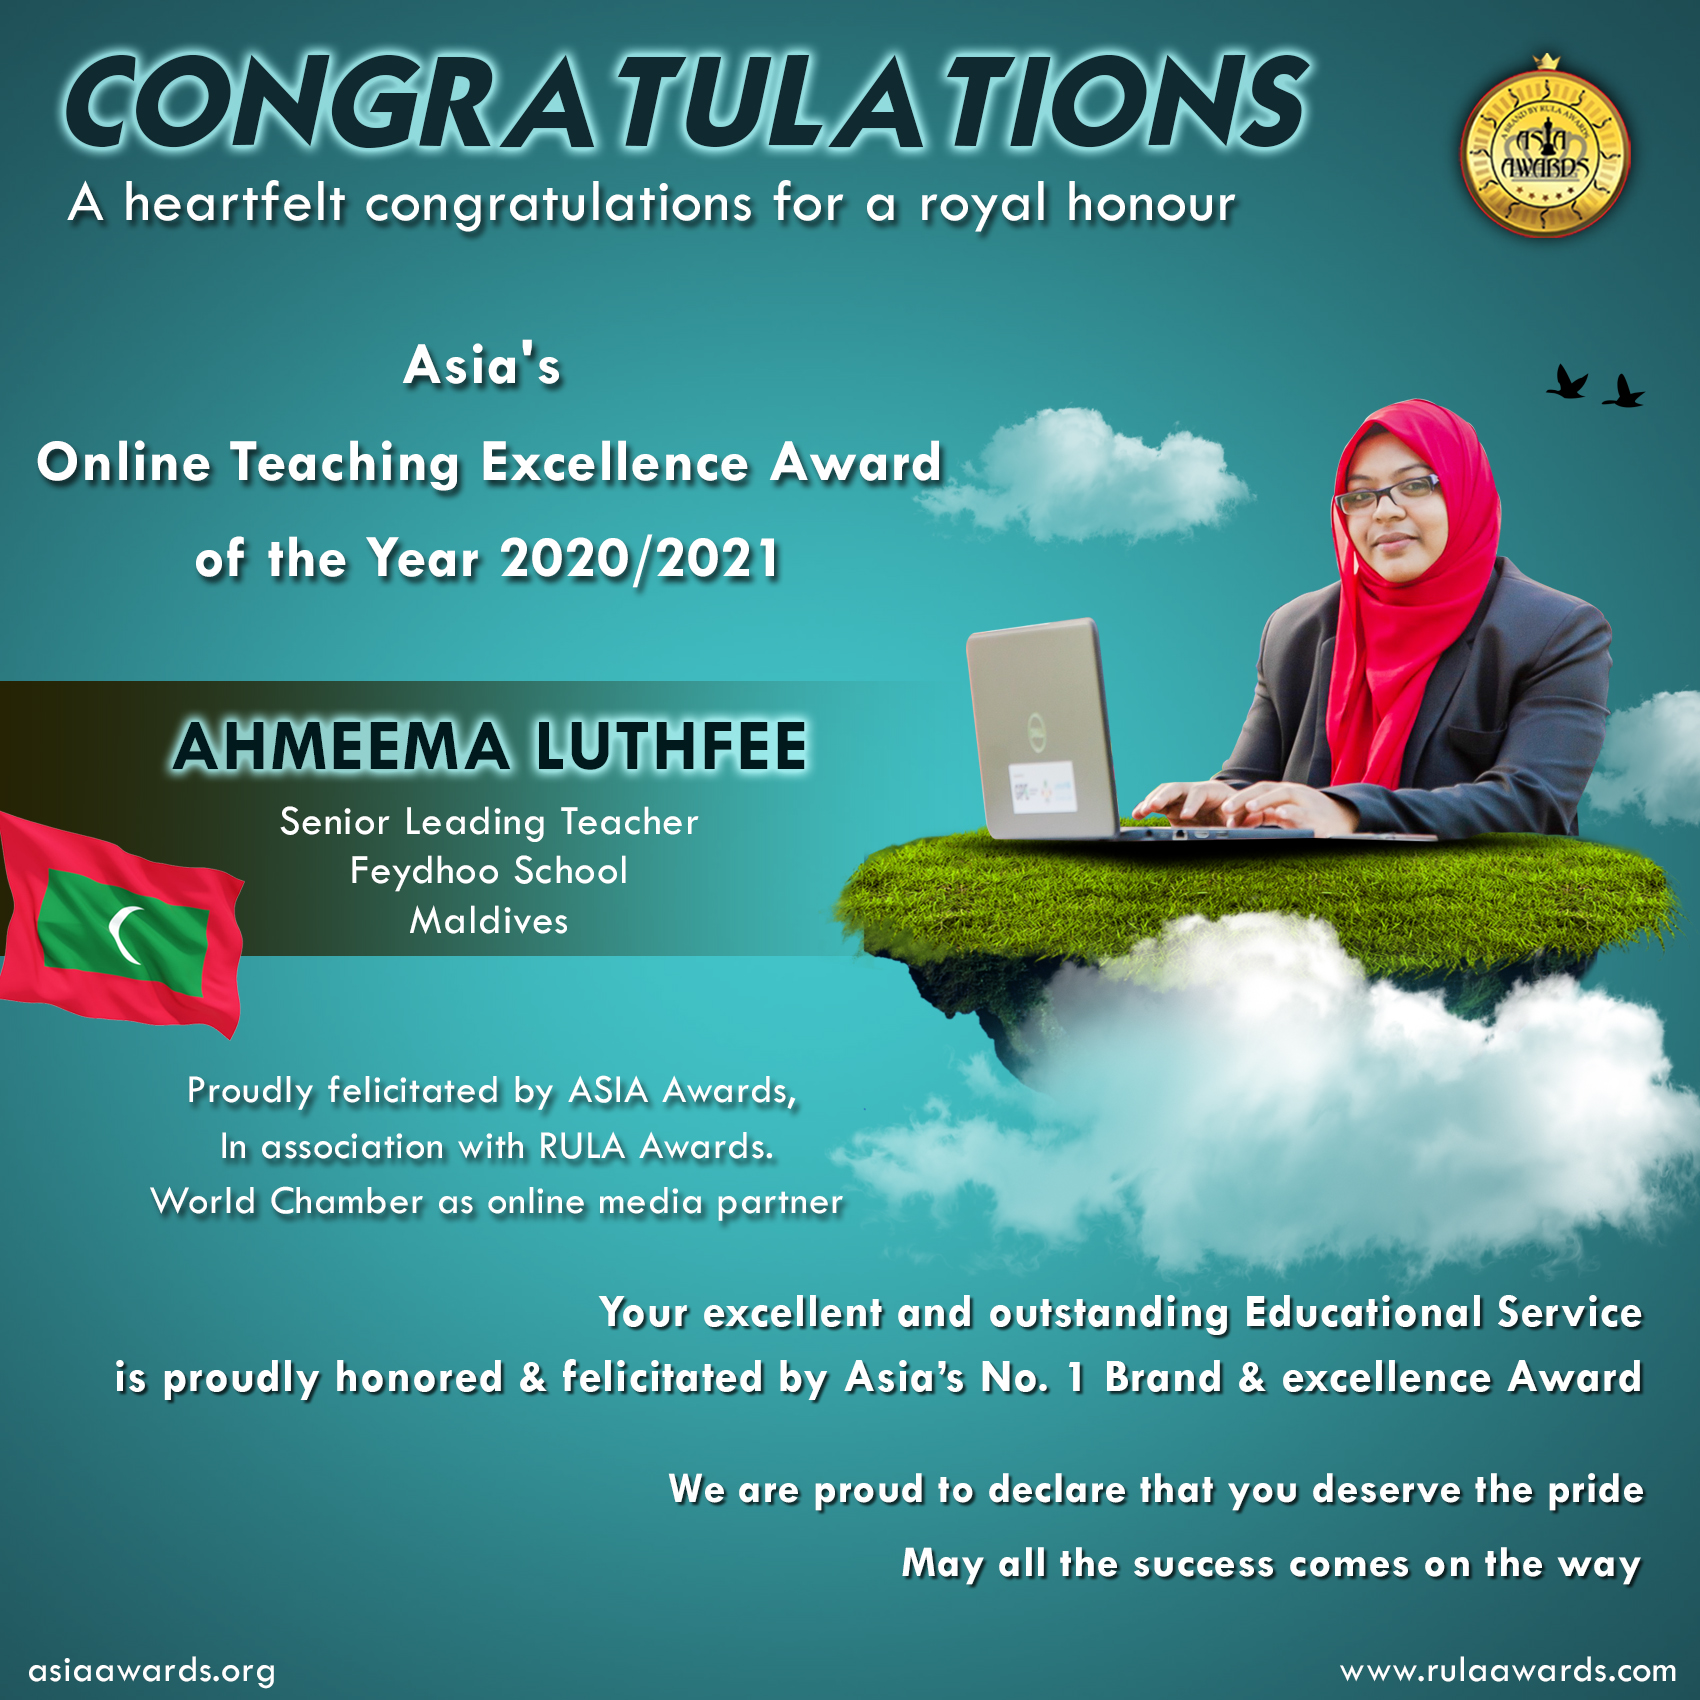 Ahmeema Luthfee has bagged Asia's Online Teaching Excellence Award